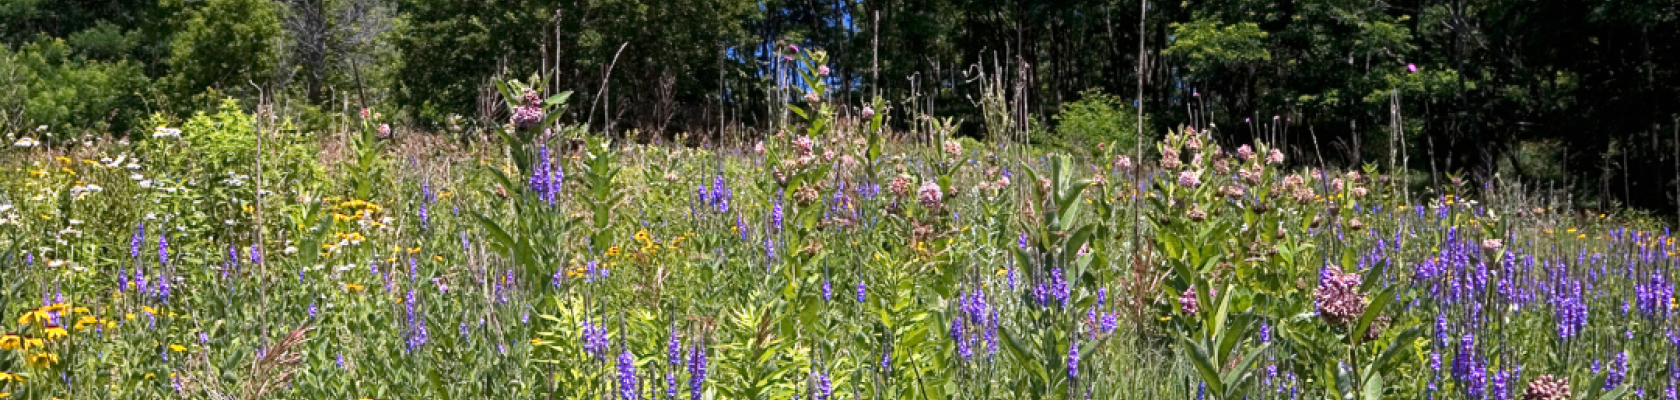 Image of a field with native plants